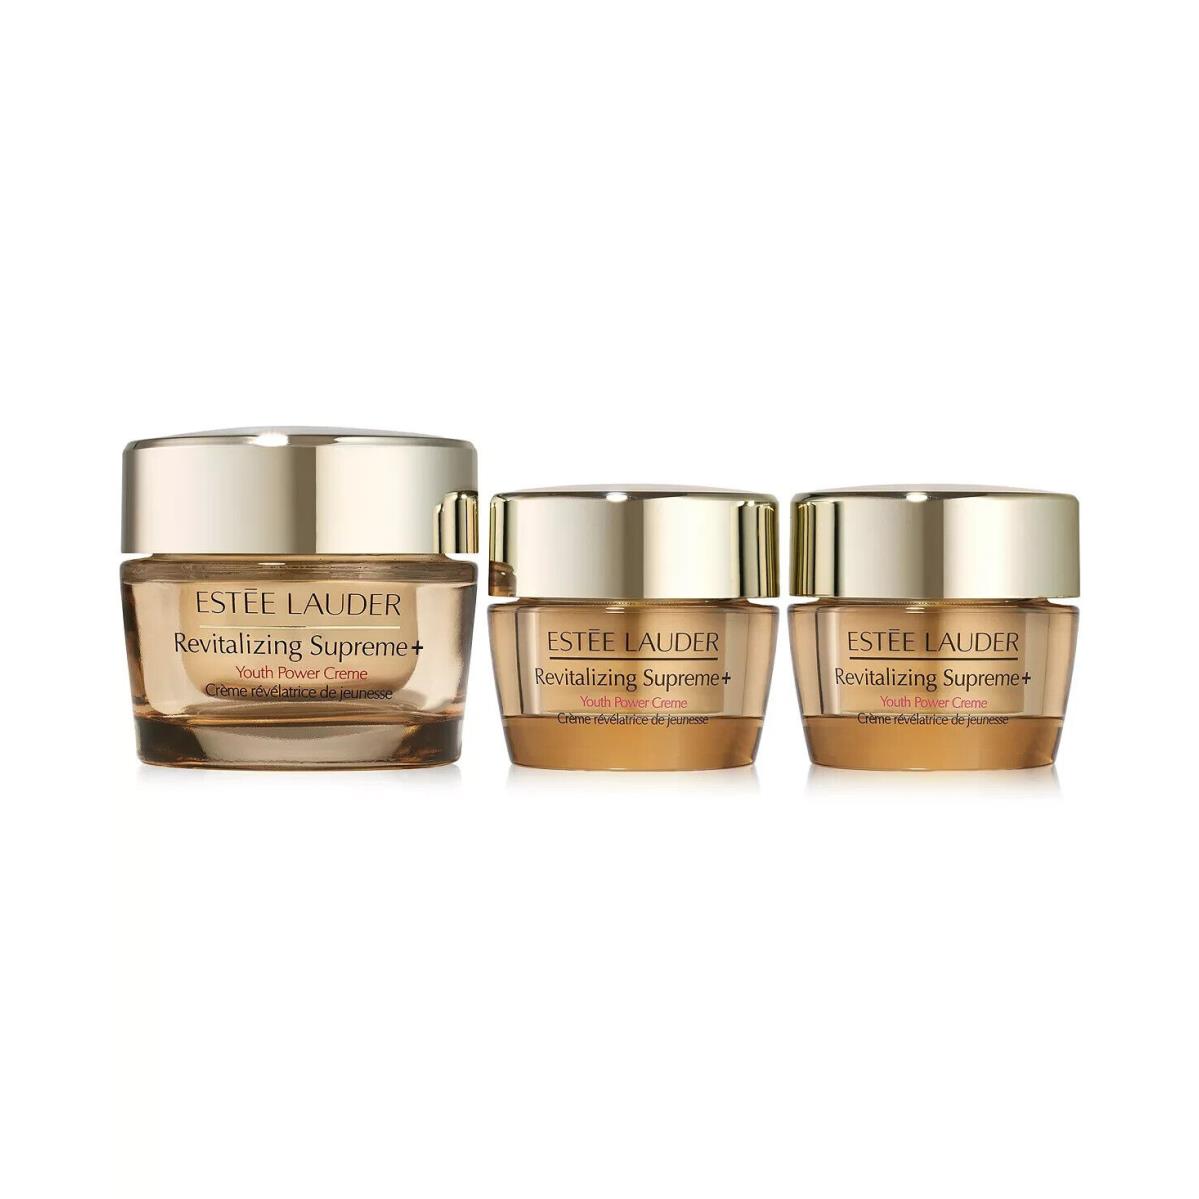 Estee Lauder 3-Pc. Glowing All The Way Firm + Lift + Brighten Skincare Set See Description